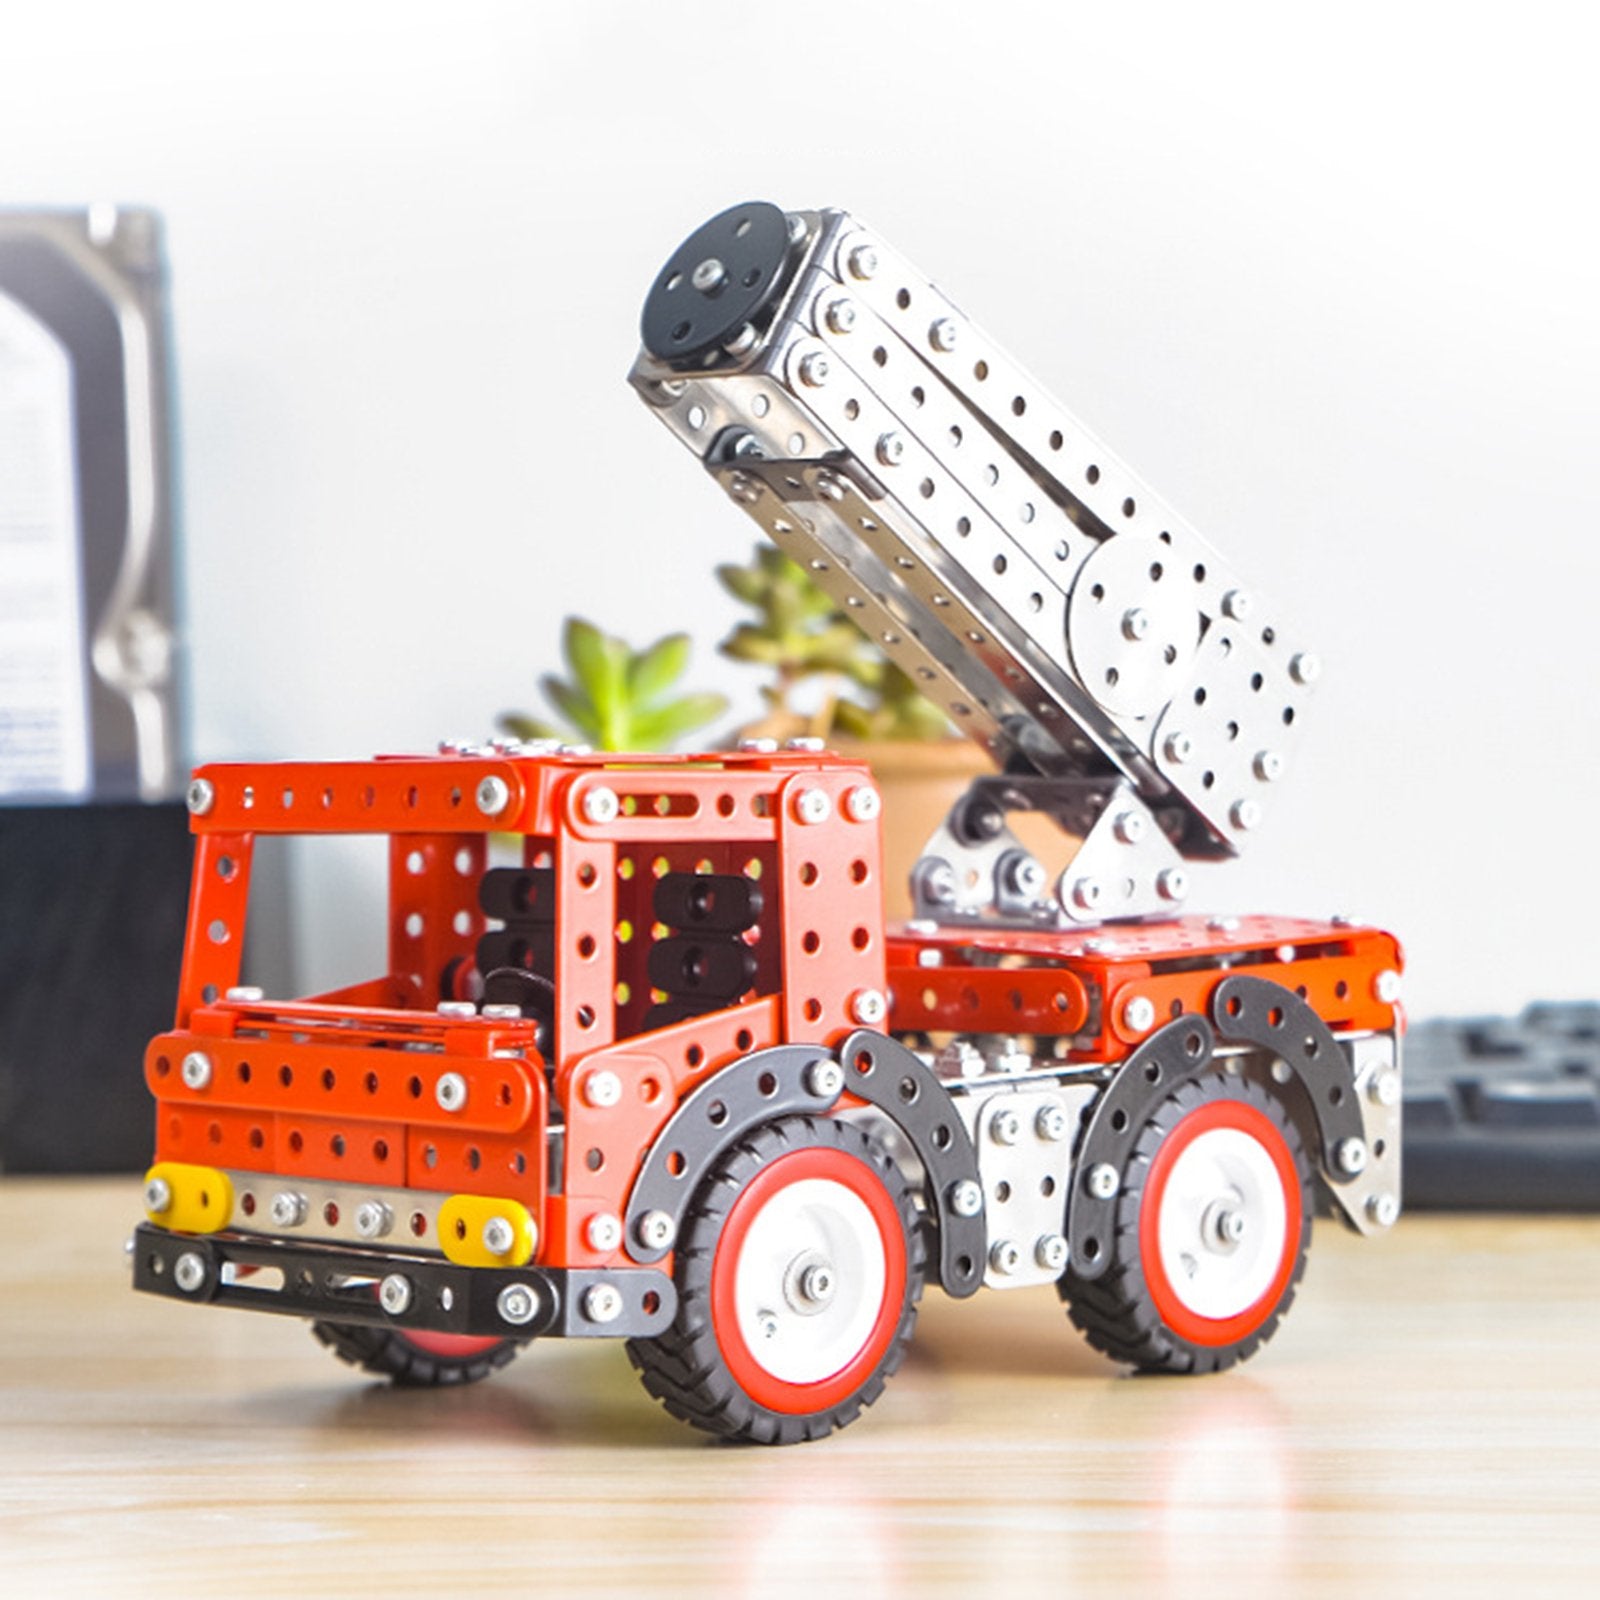 612Pcs 3D Metal Fire Truck with Extending Ladder Assembly Puzzle Toy